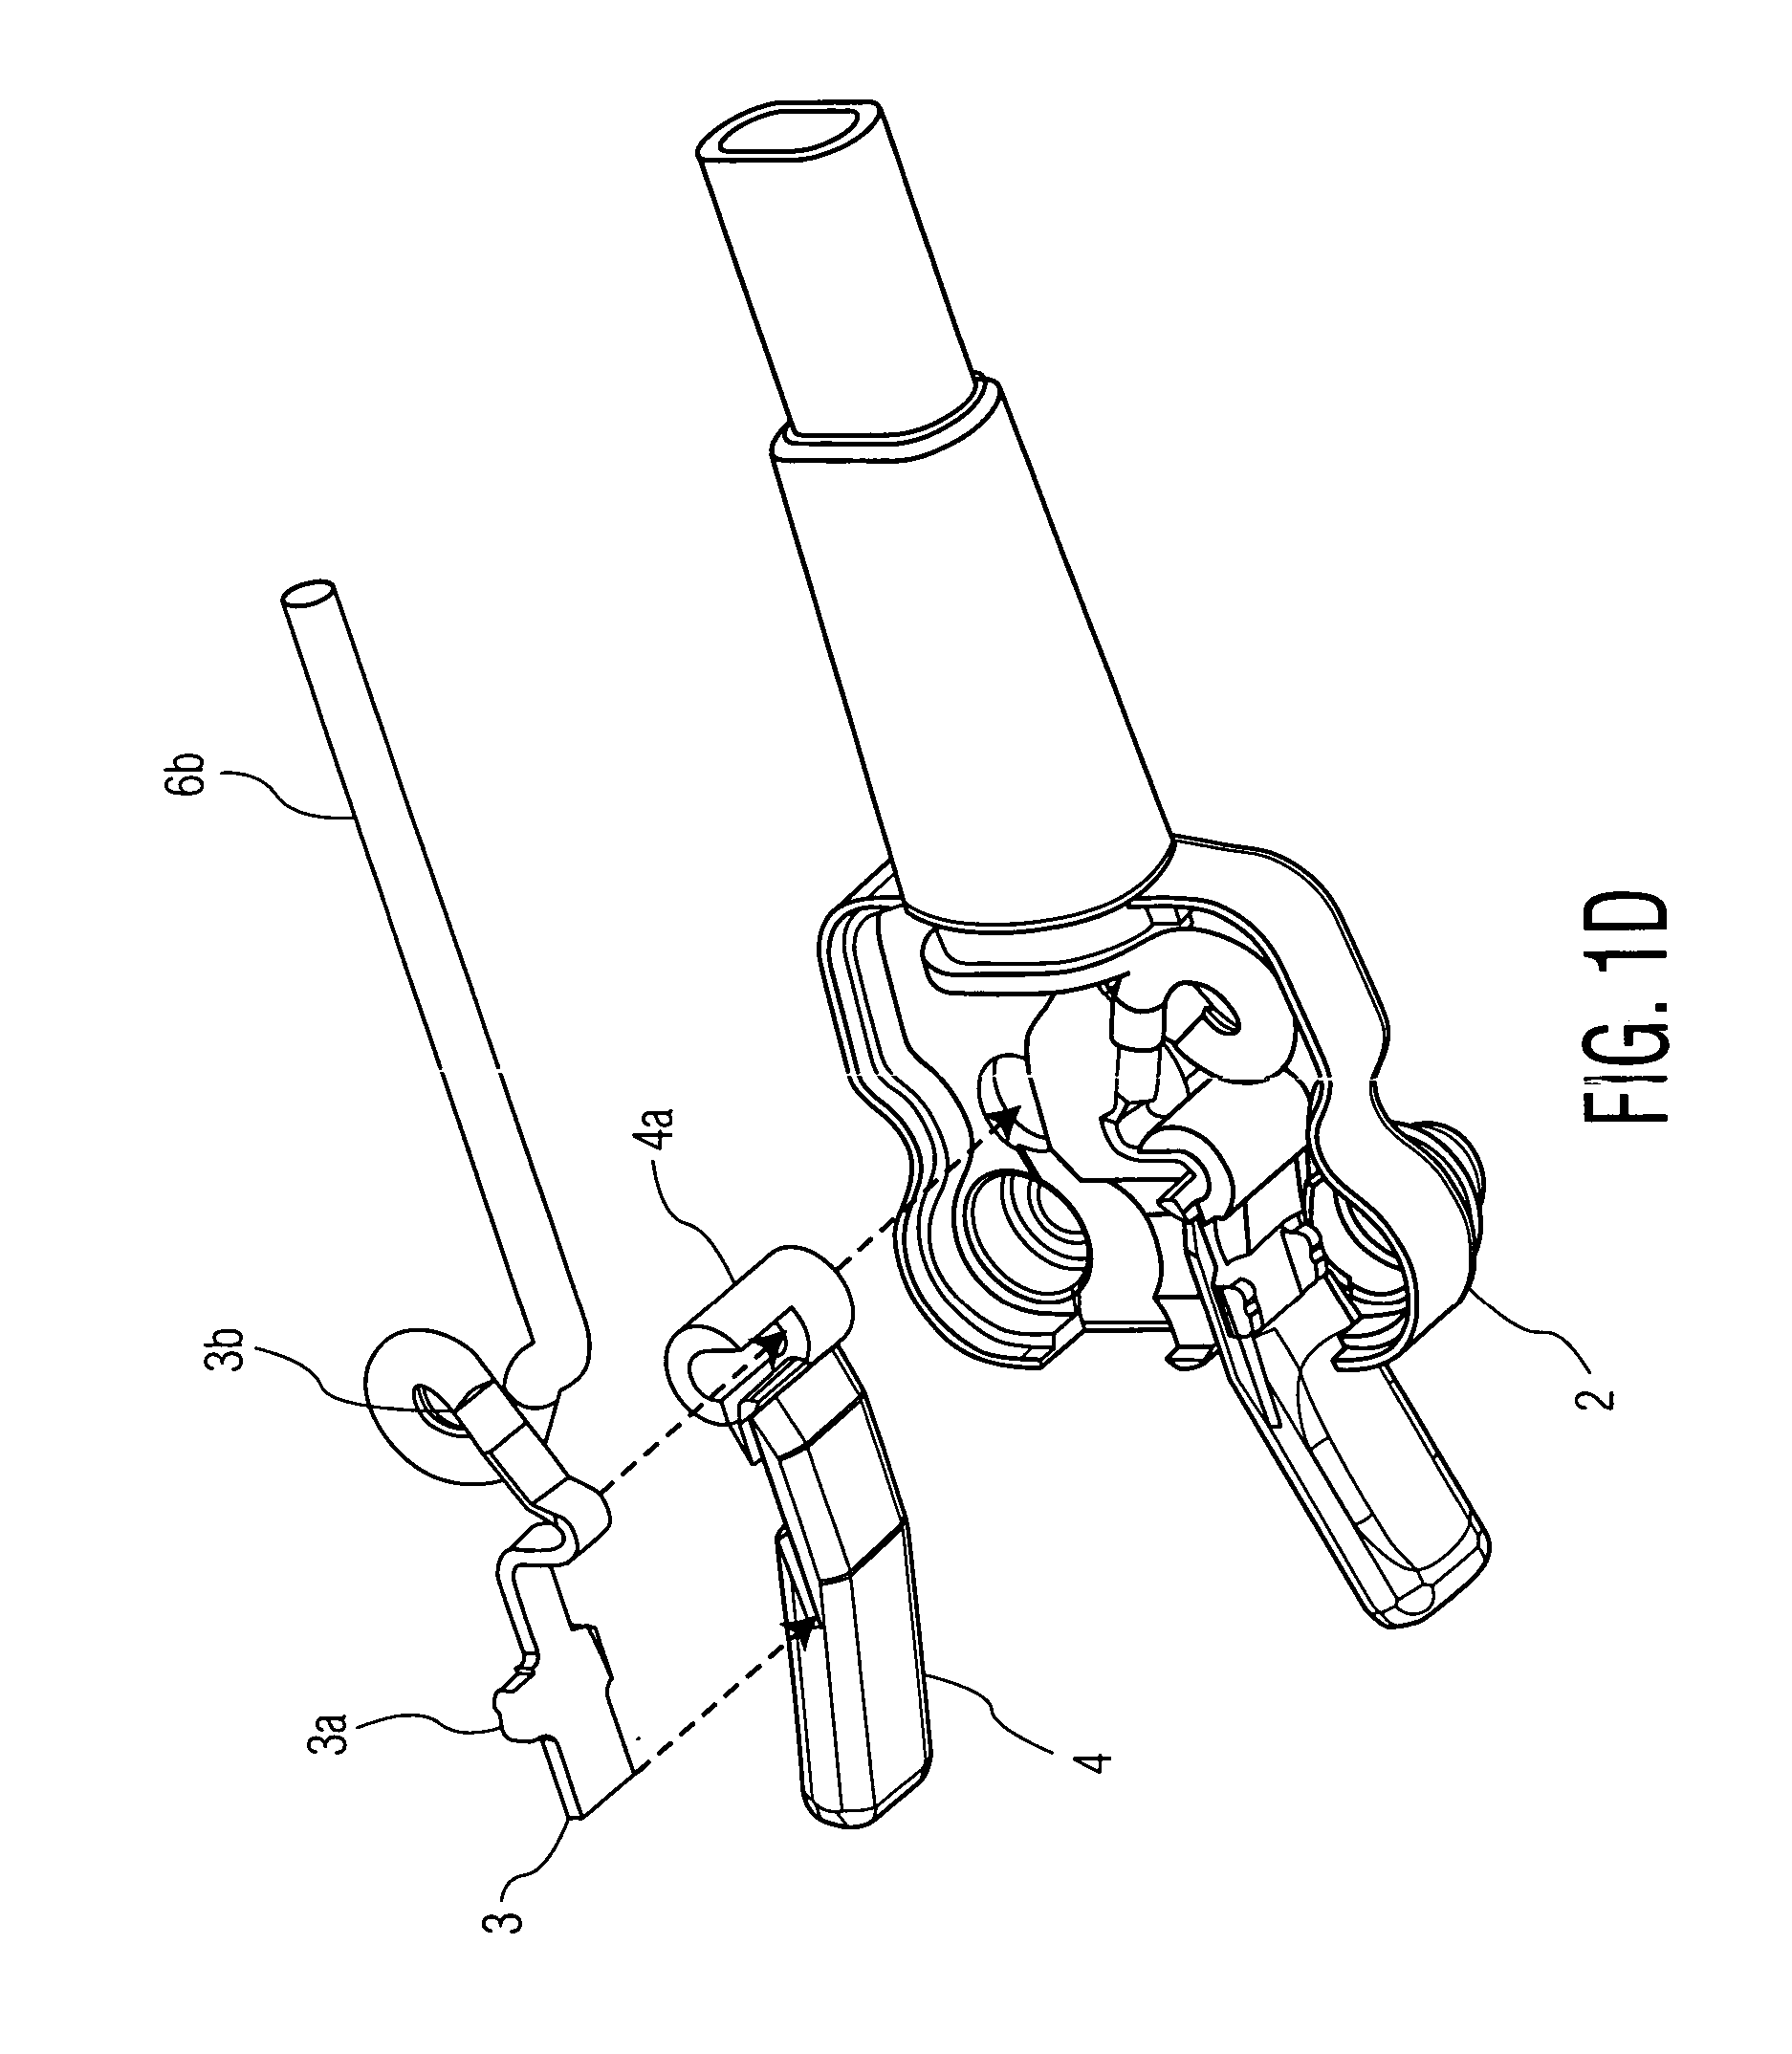 Double connector for medical sensor